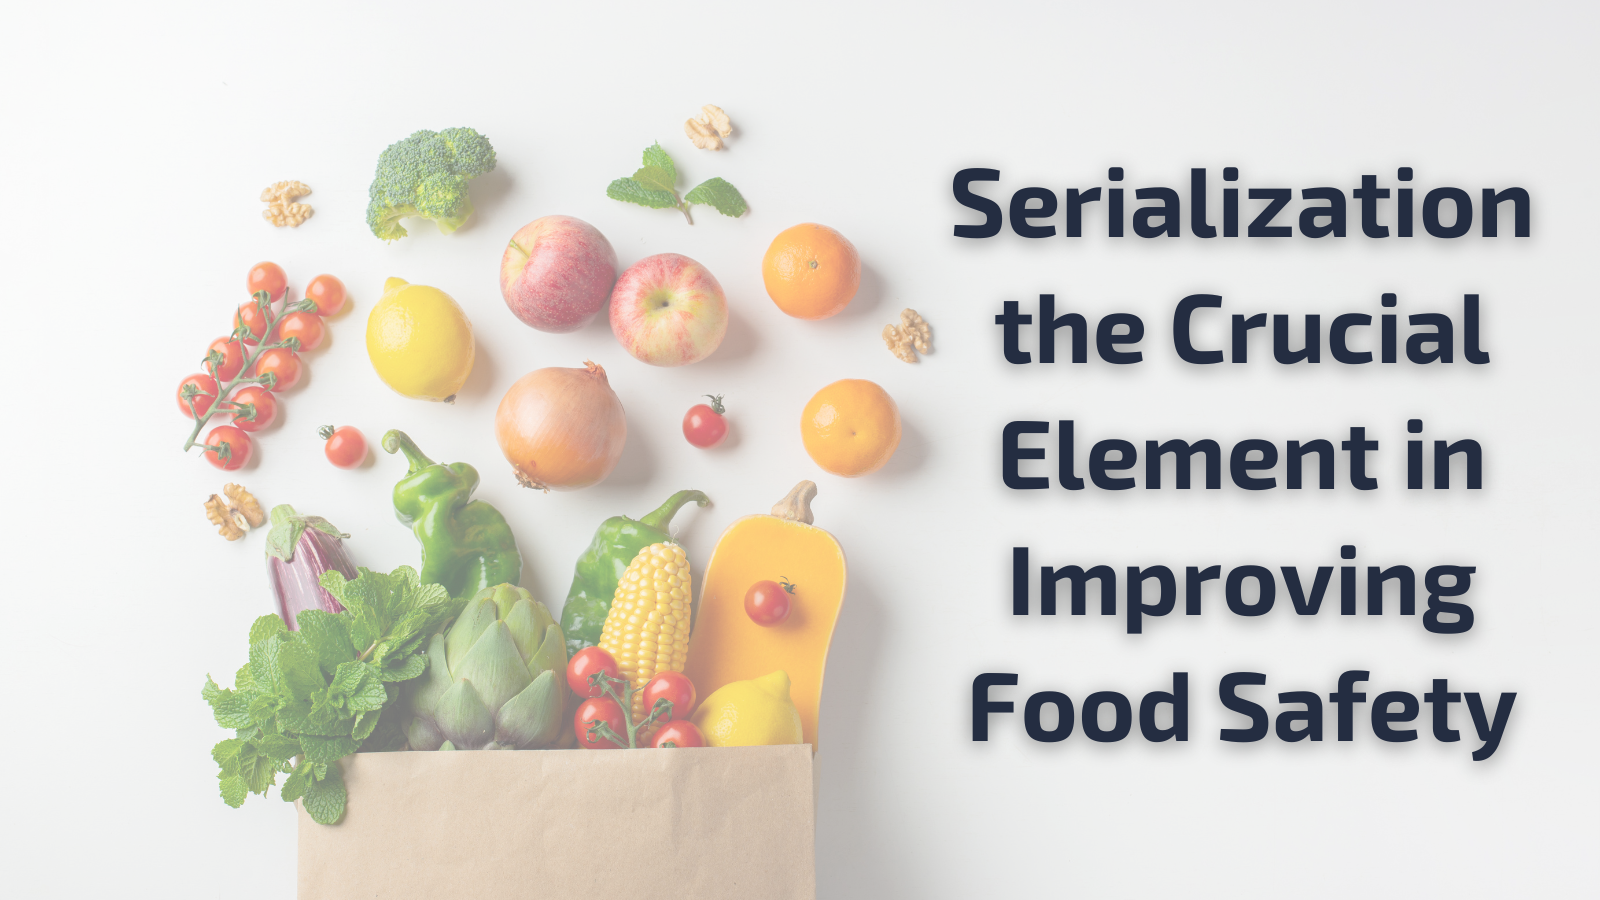 Serialization the Crucial Element in Improving Food Safety